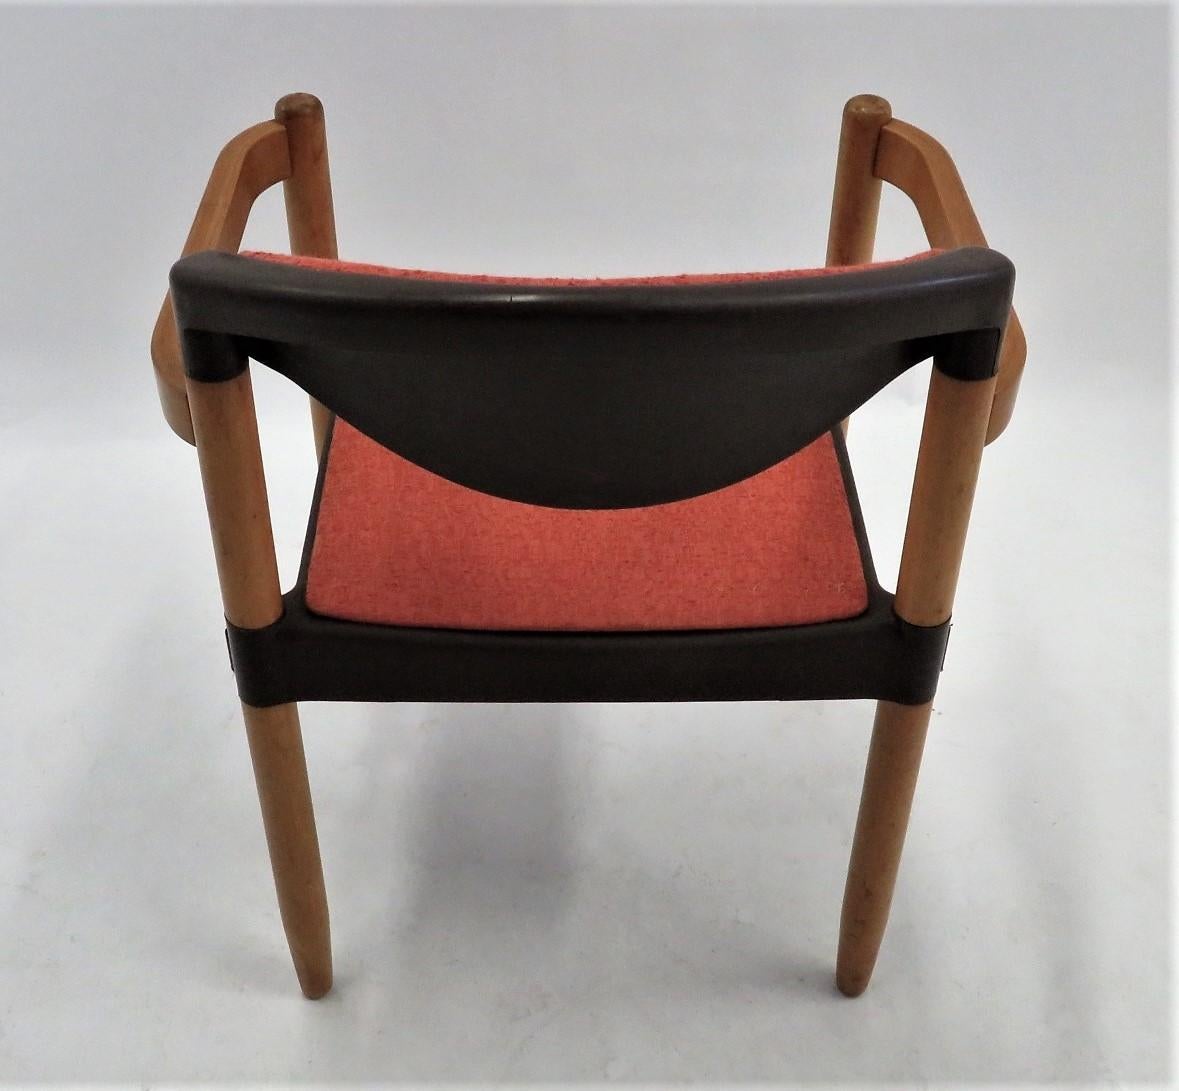 6 Strax Dining Chairs by Casala / Germany 1970s by Harmut Lohmeyer 1